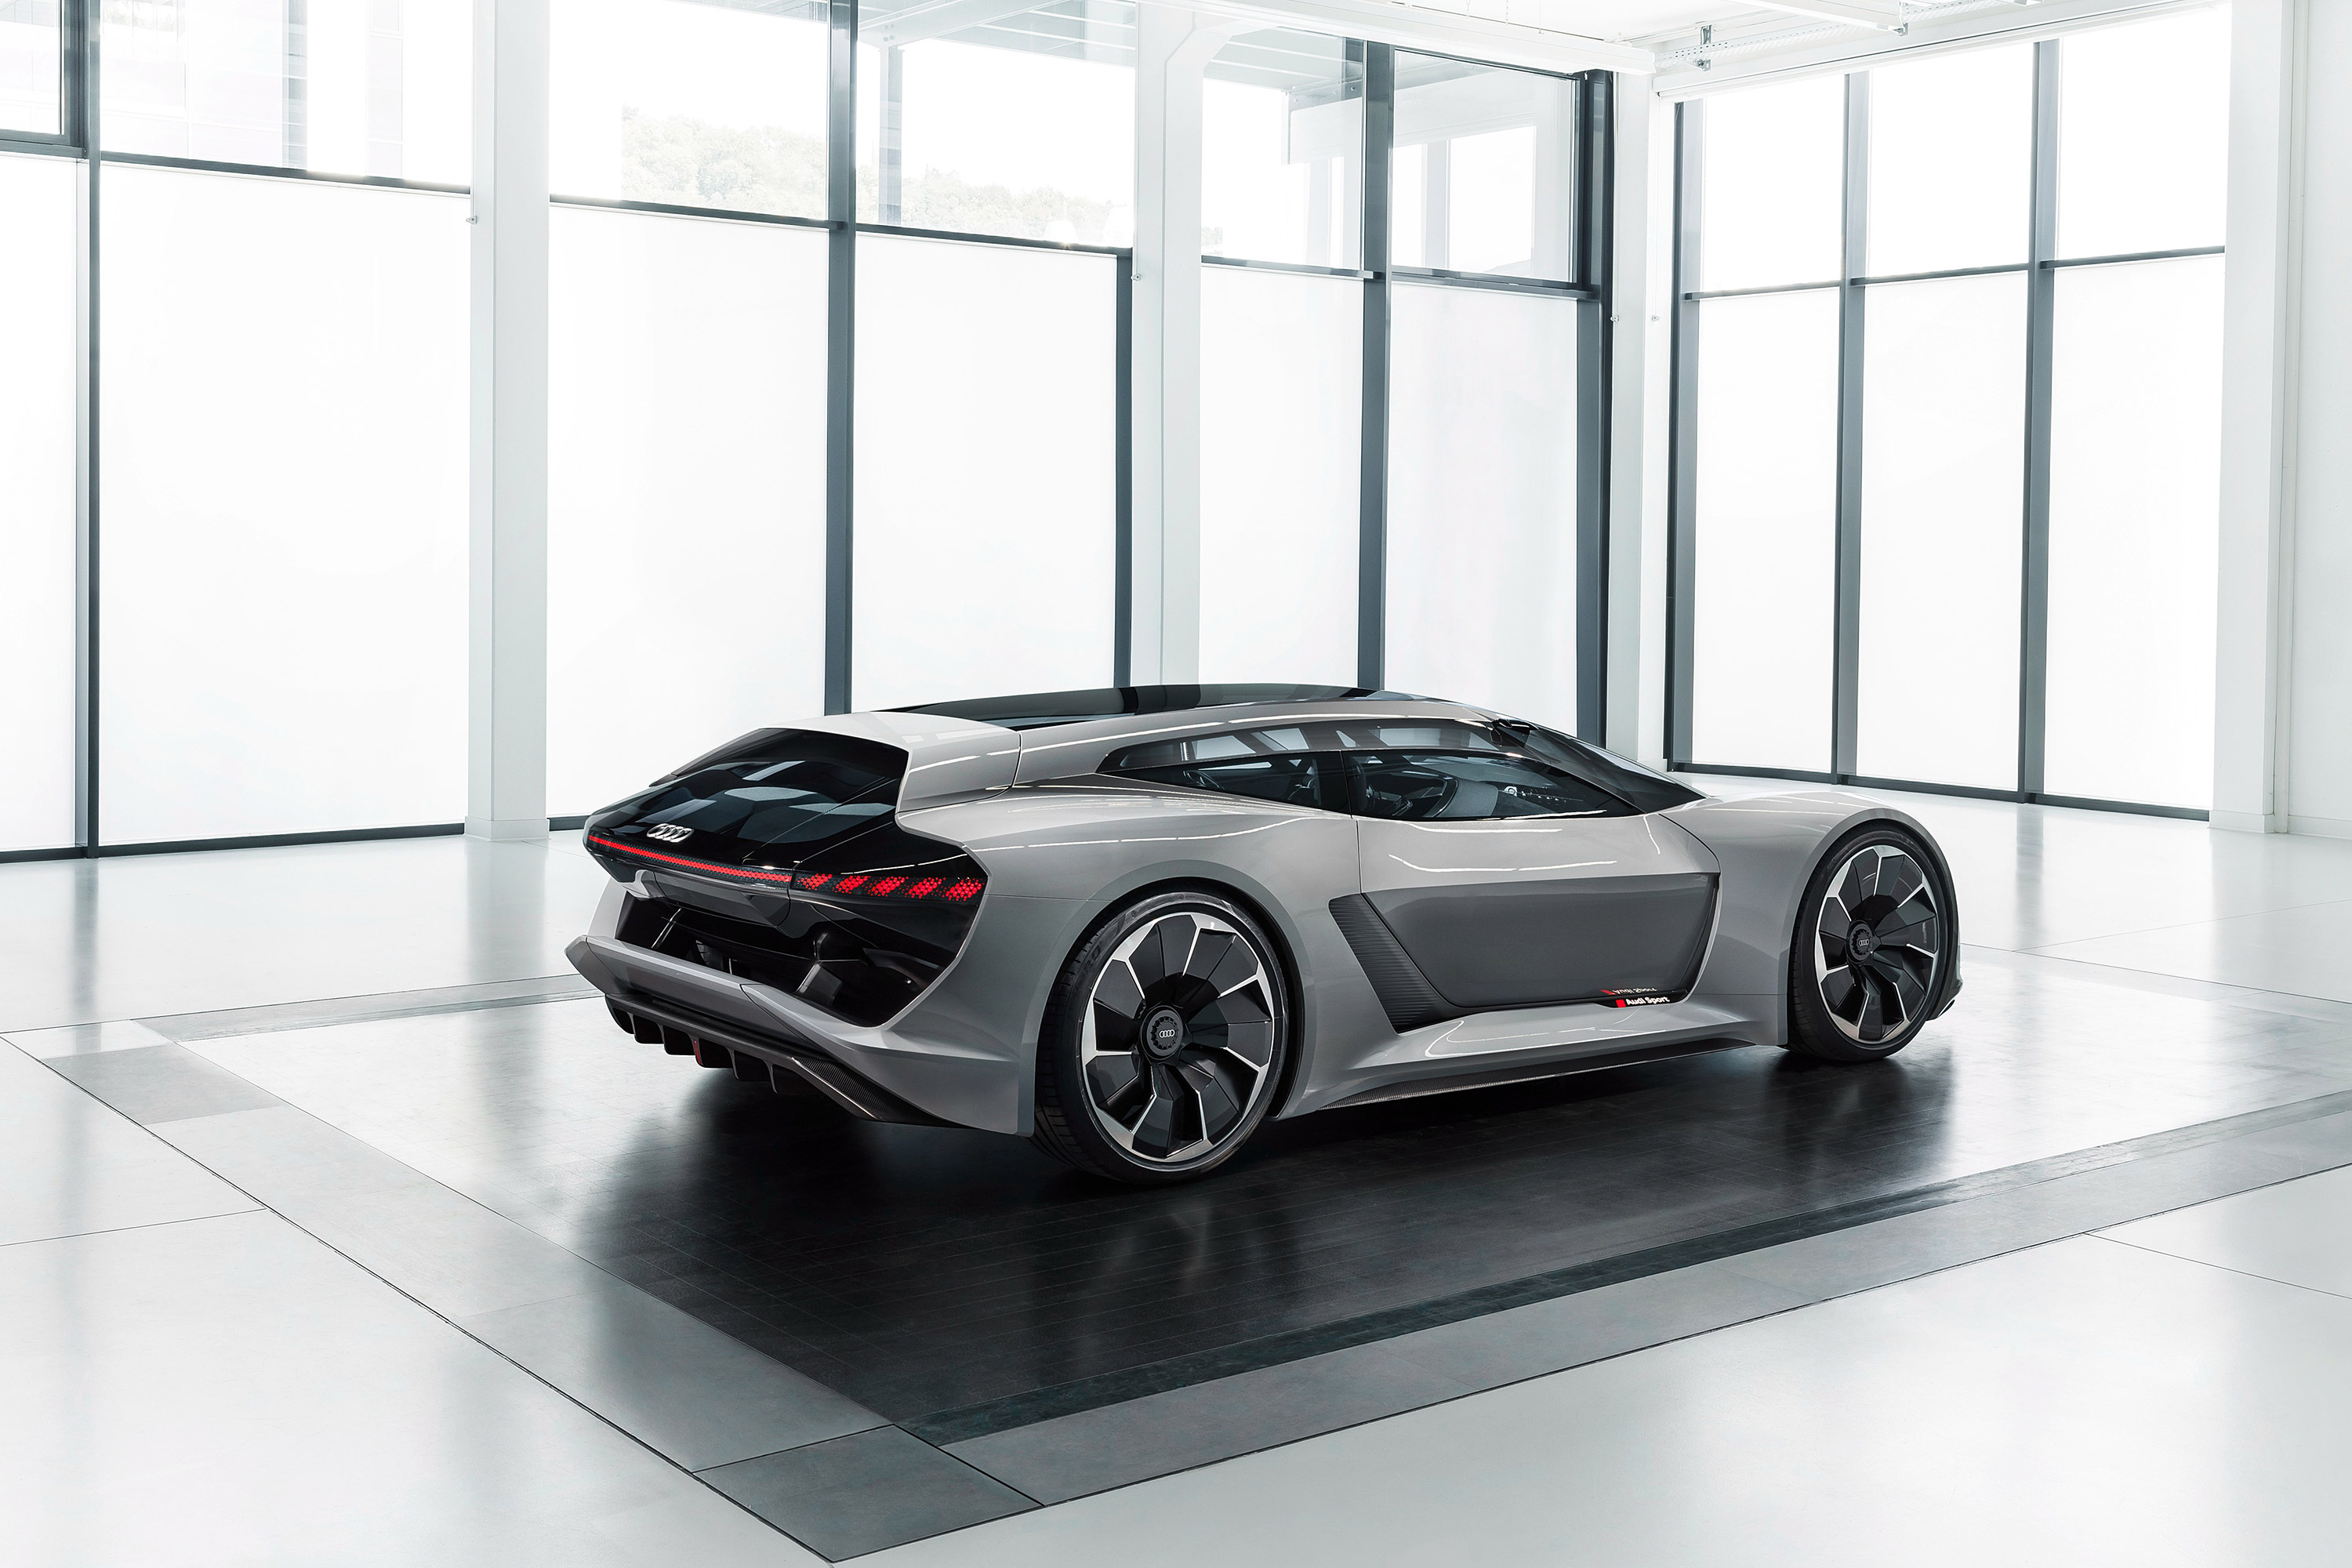  Audi Pb18 E Tron HD Android Wallpapers